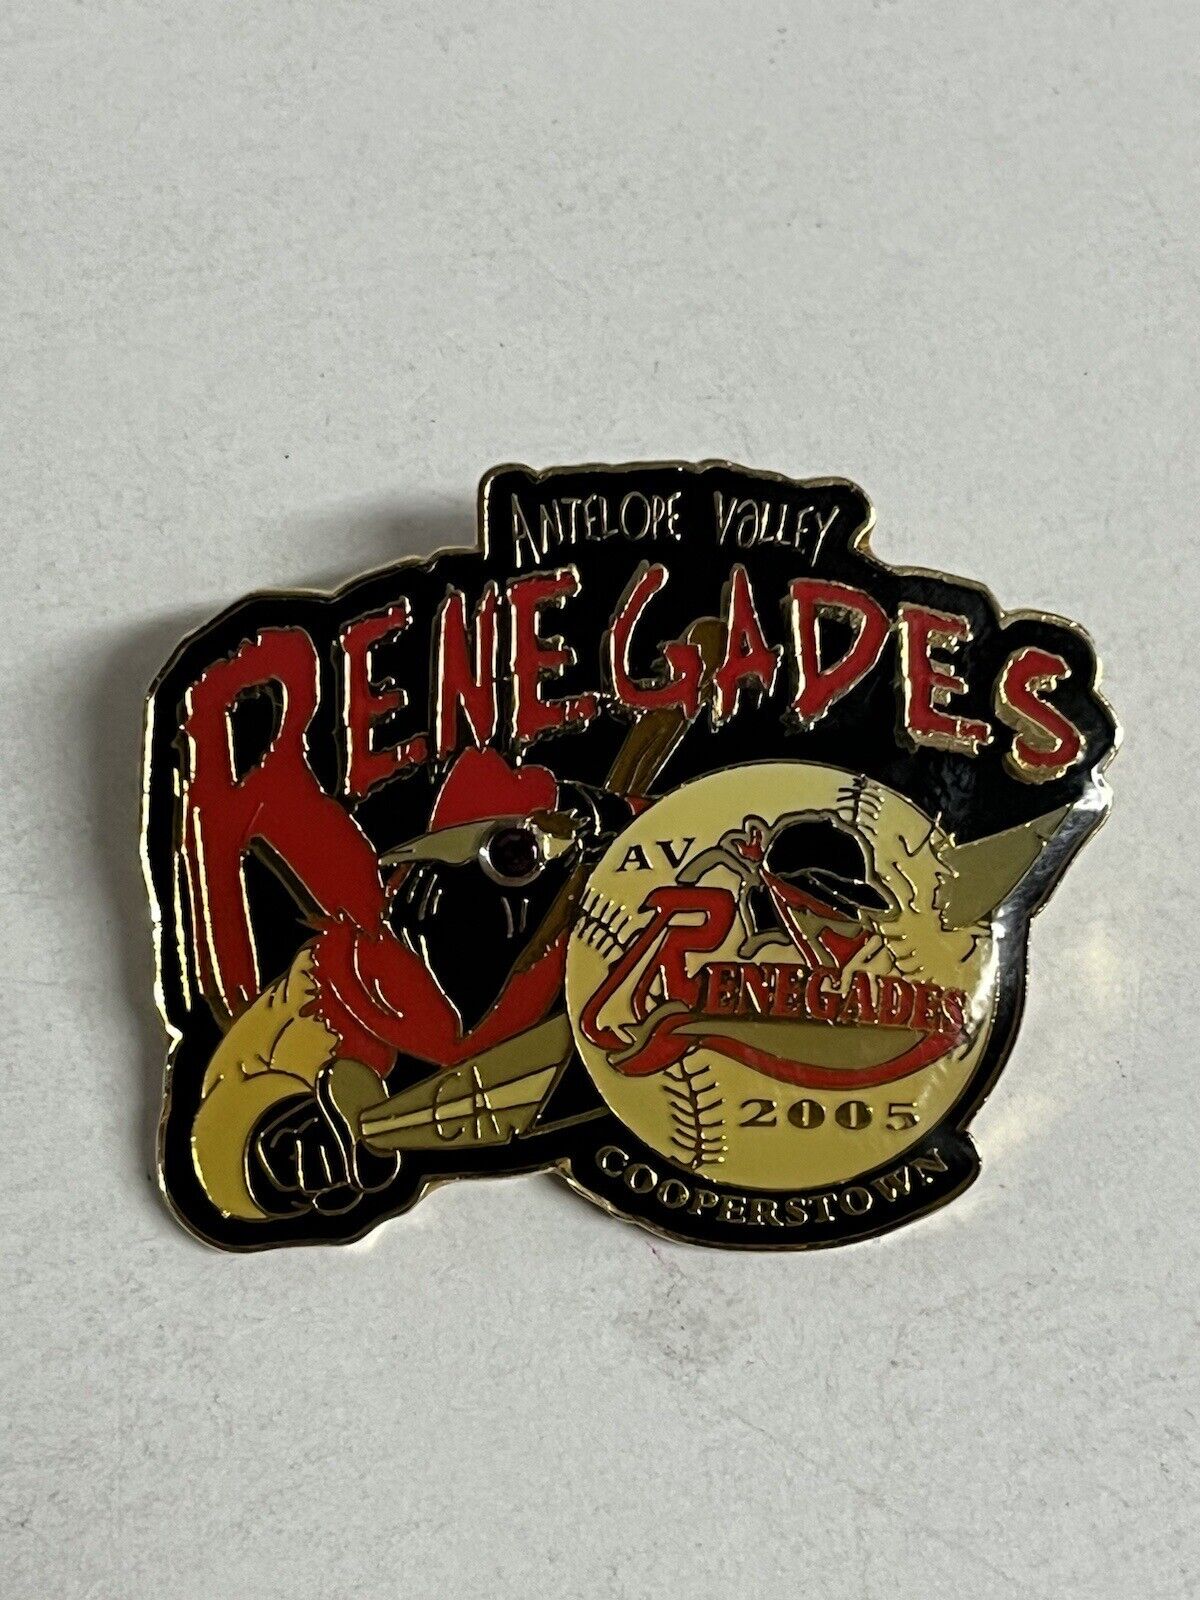 Cooperstown Dreams Park Pin 2005 Antelope Valley Renegades Baseball Collectors